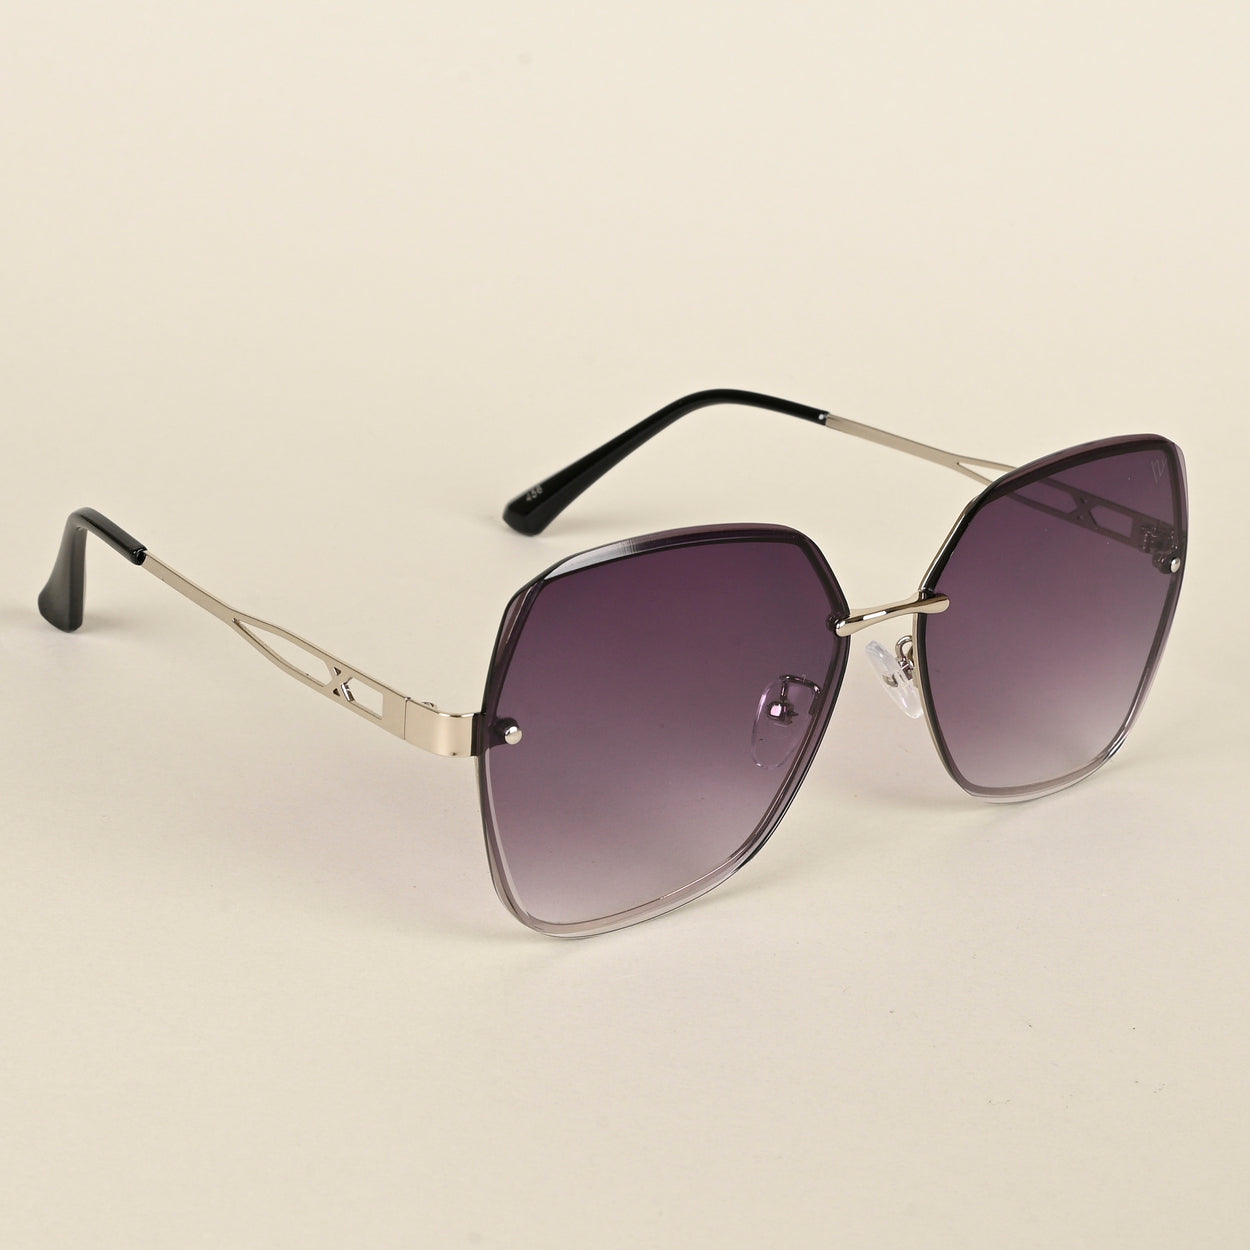 Voyage Grey Oversize Sunglasses for Women - MG4319